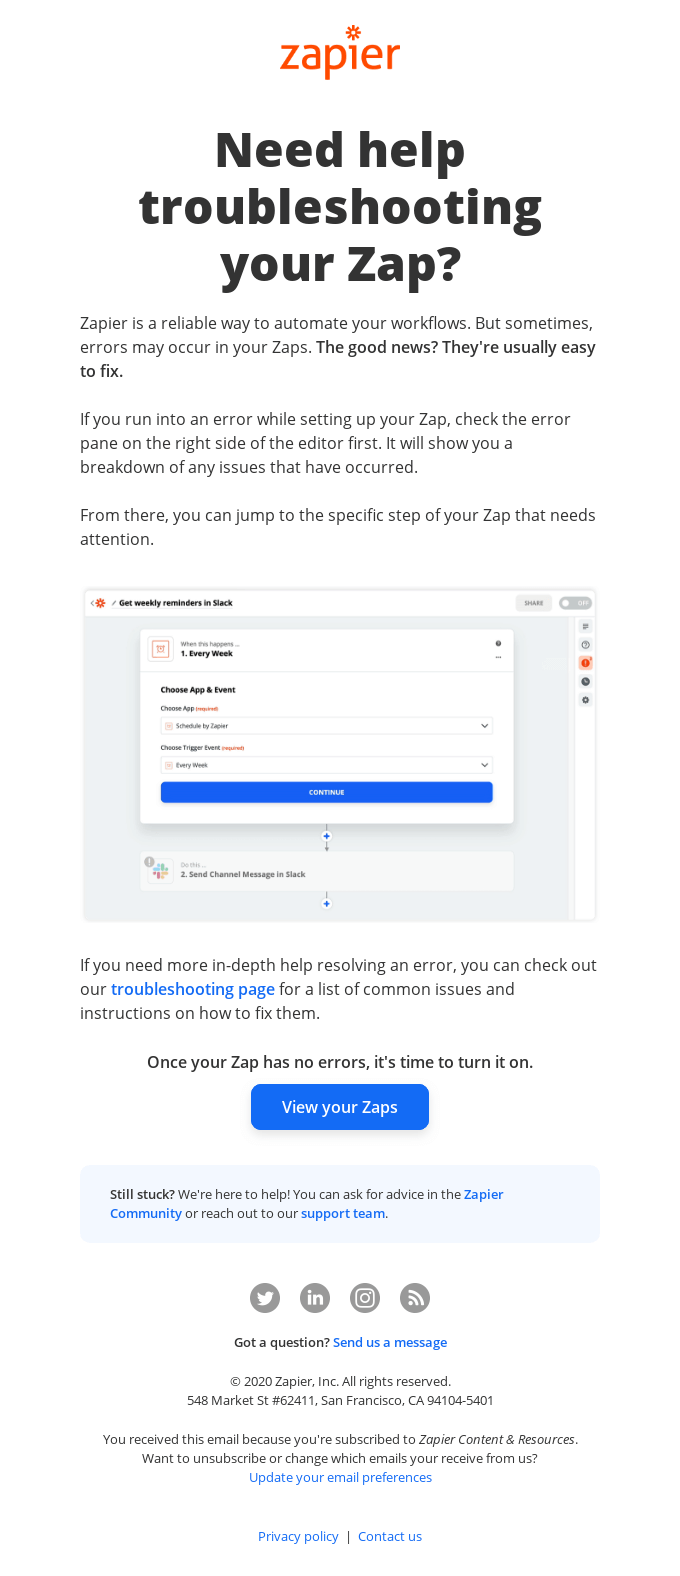 Have a problem with your Zap? - Zapier Email Newsletter